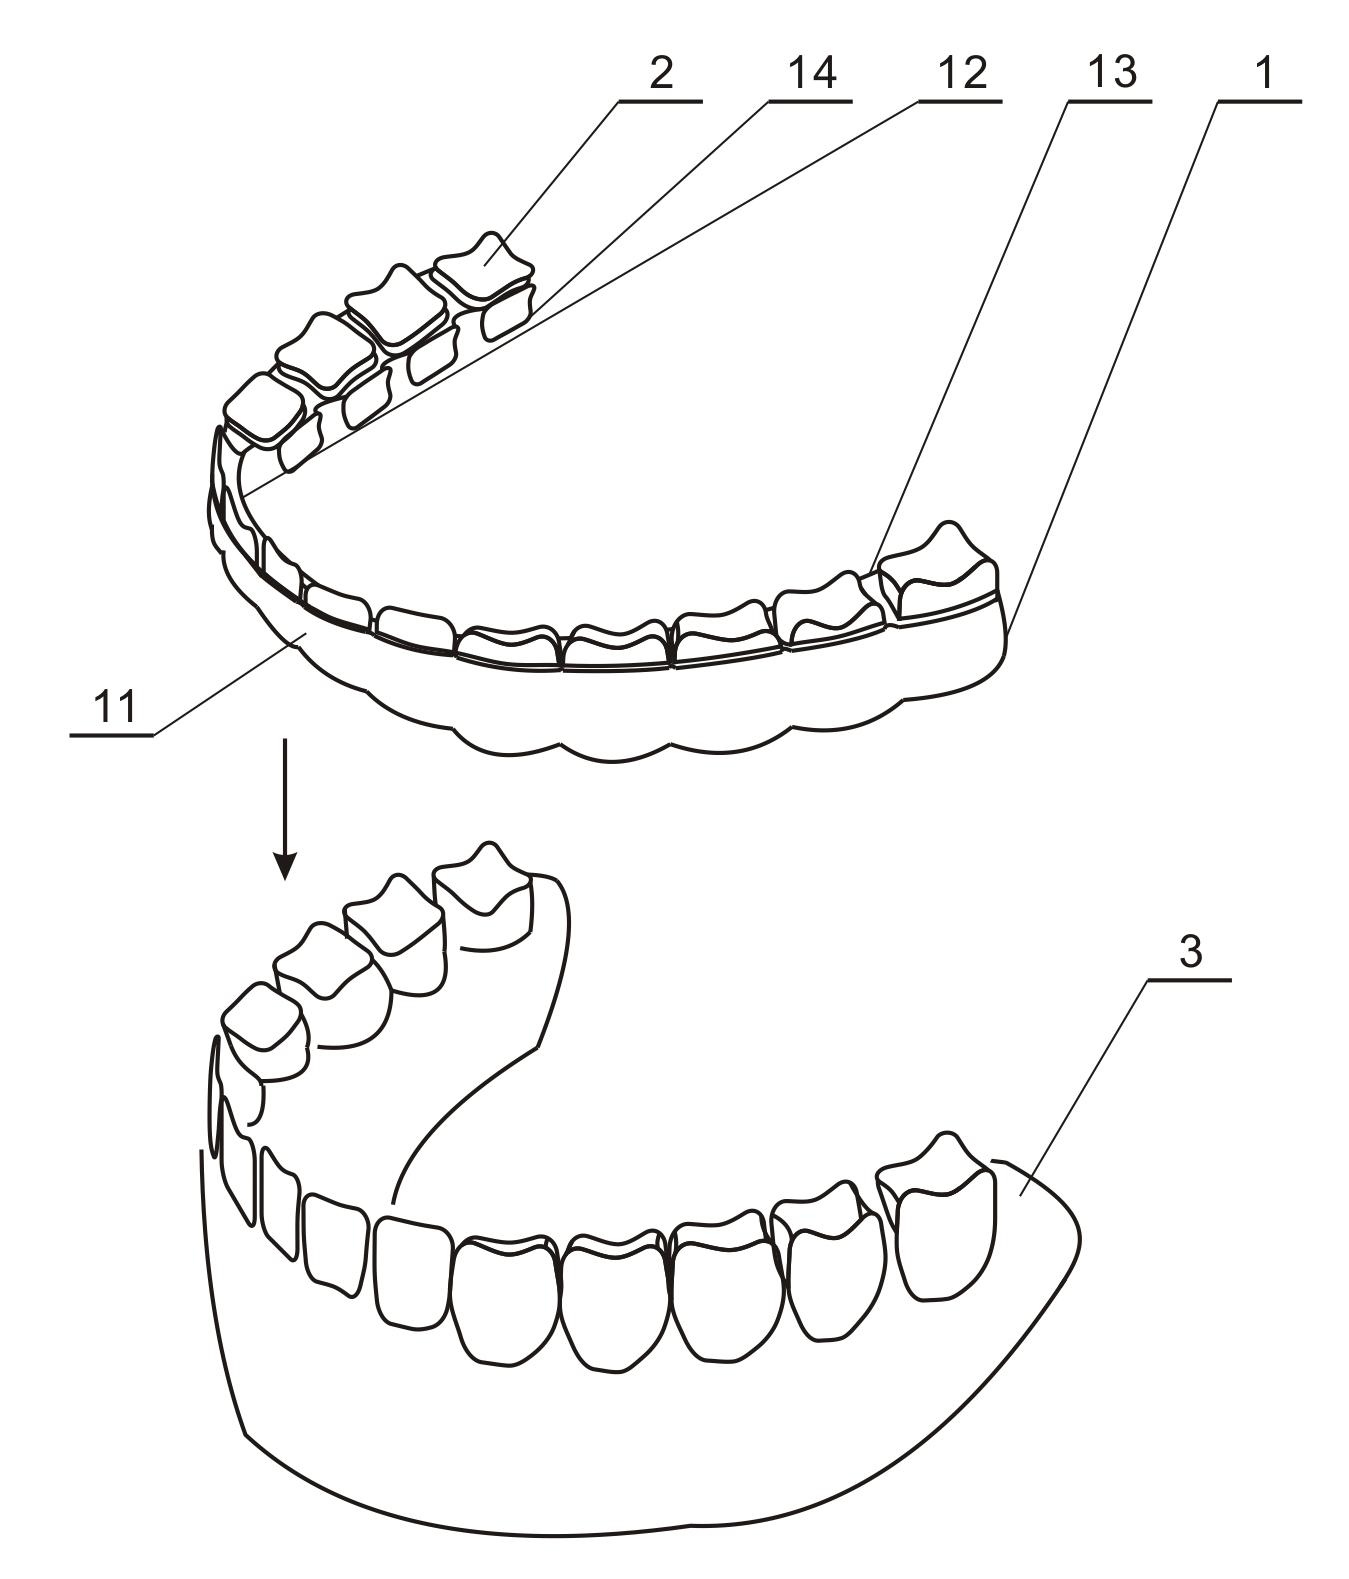 Tooth socket for protecting teeth